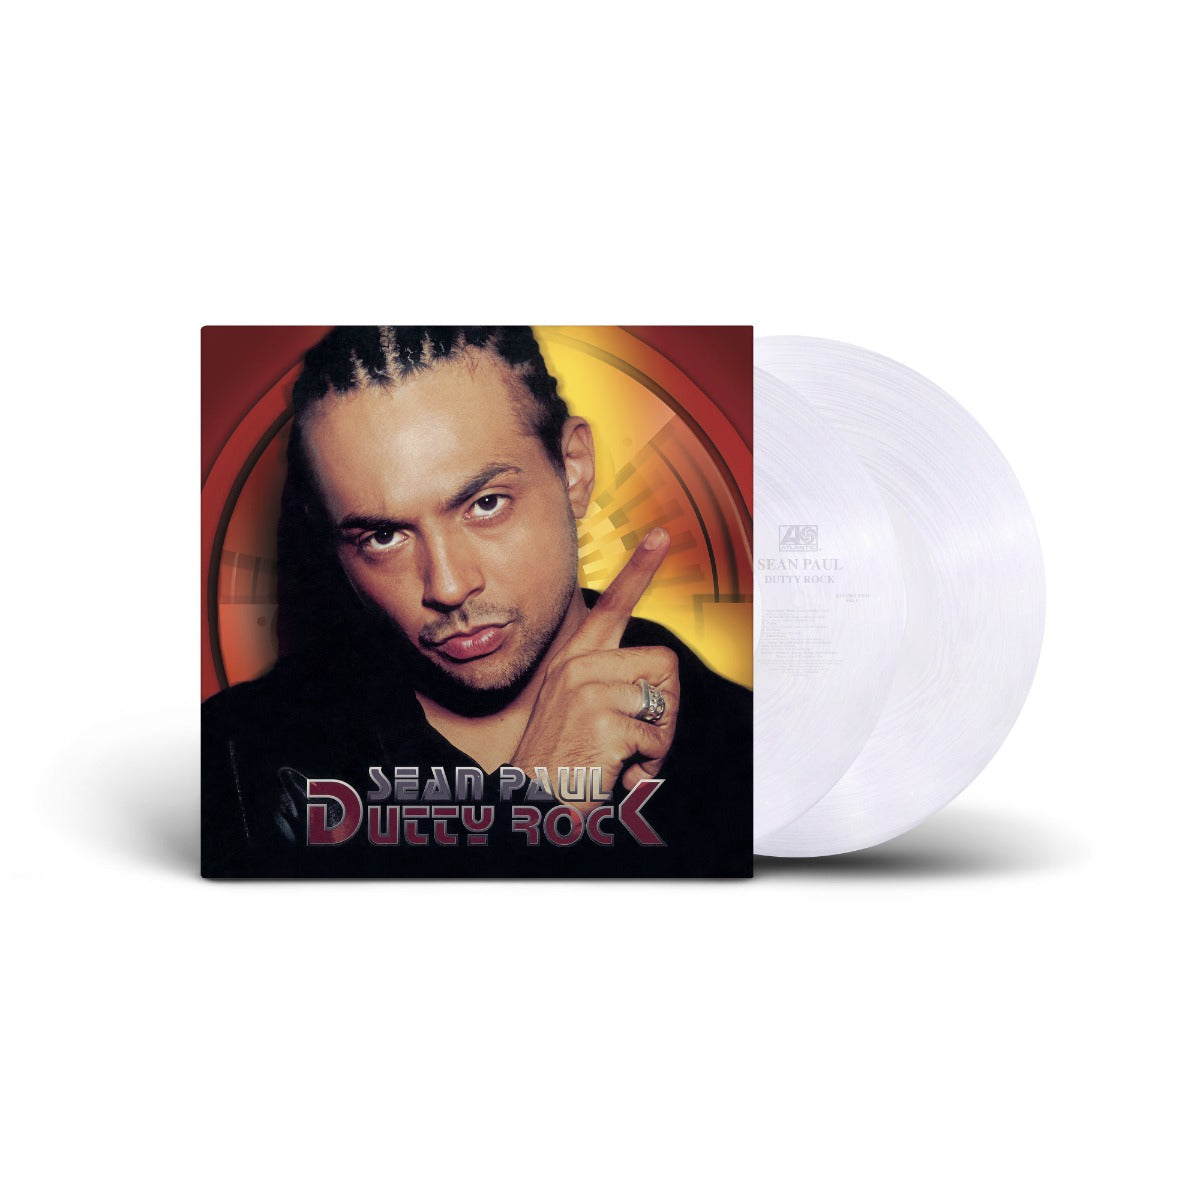 Sean Paul Dutty Rock (20th Anniversary Deluxe Edition) (Crystal Clear Vinyl, Brick & Mortar Exclusive) (2 Lp's)